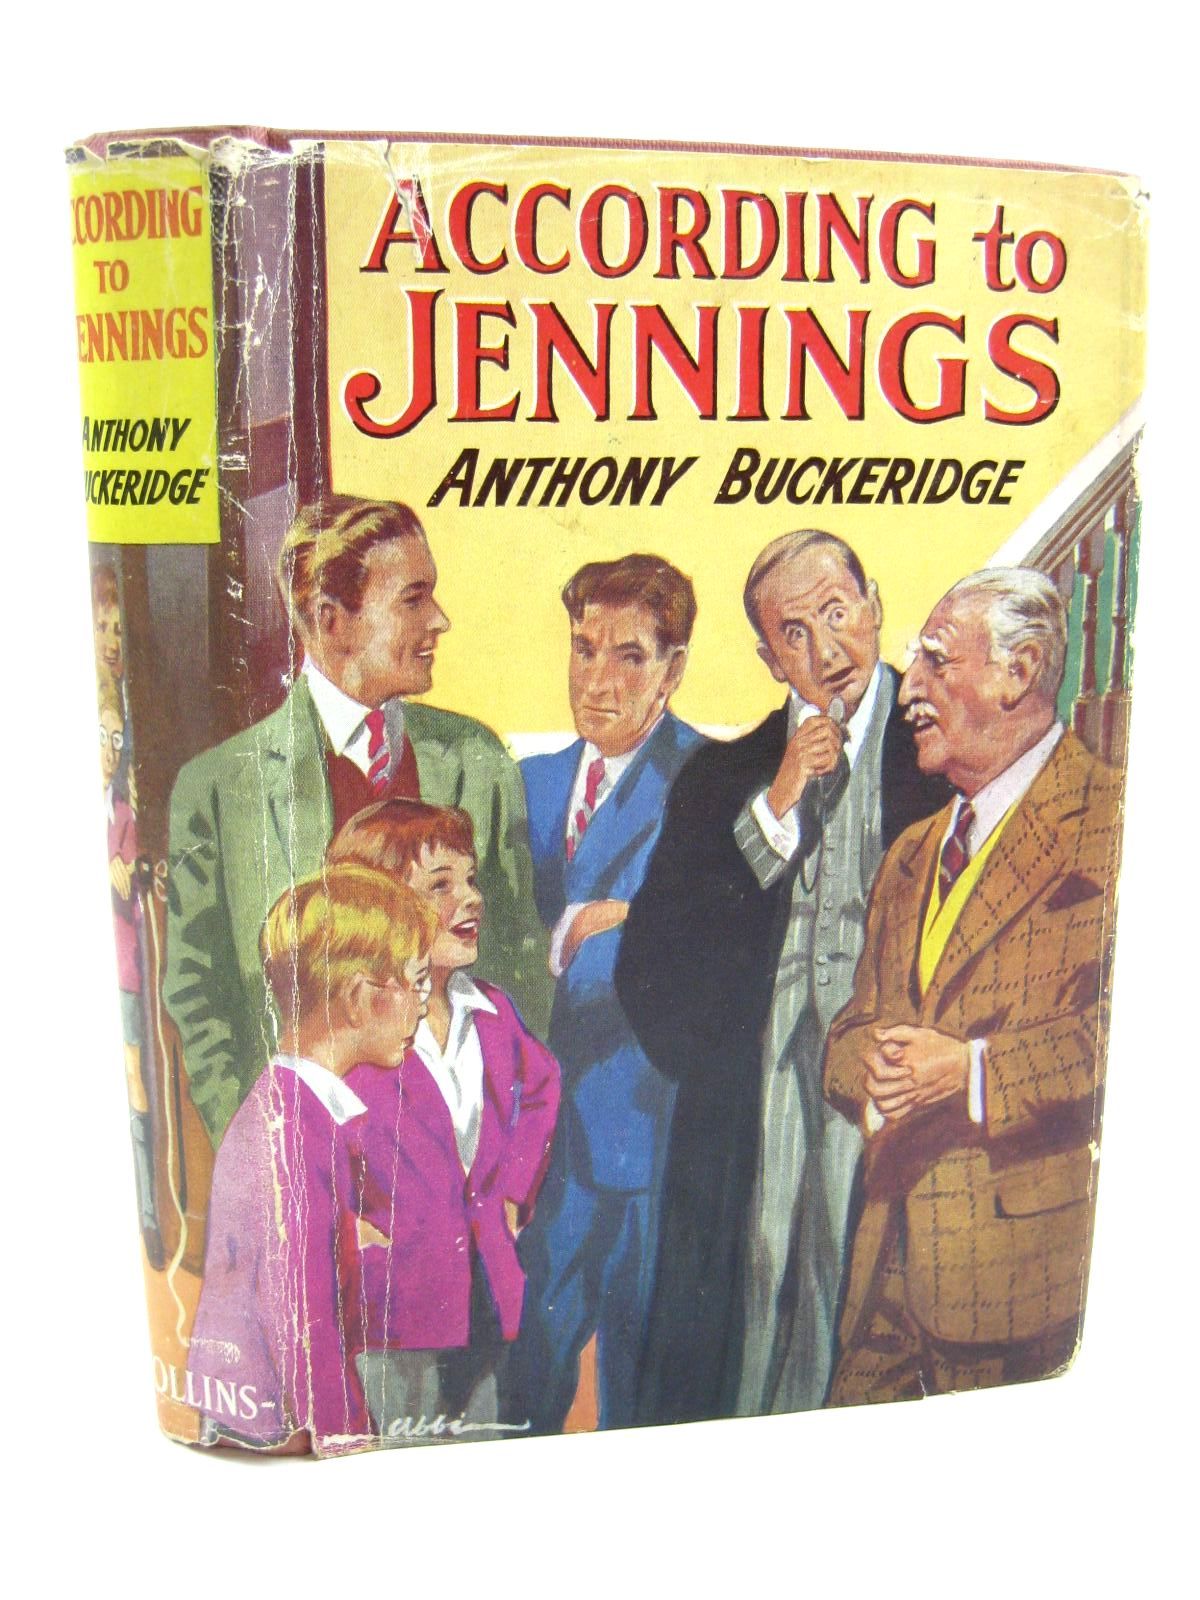 Cover of ACCORDING TO JENNINGS by Anthony Buckeridge